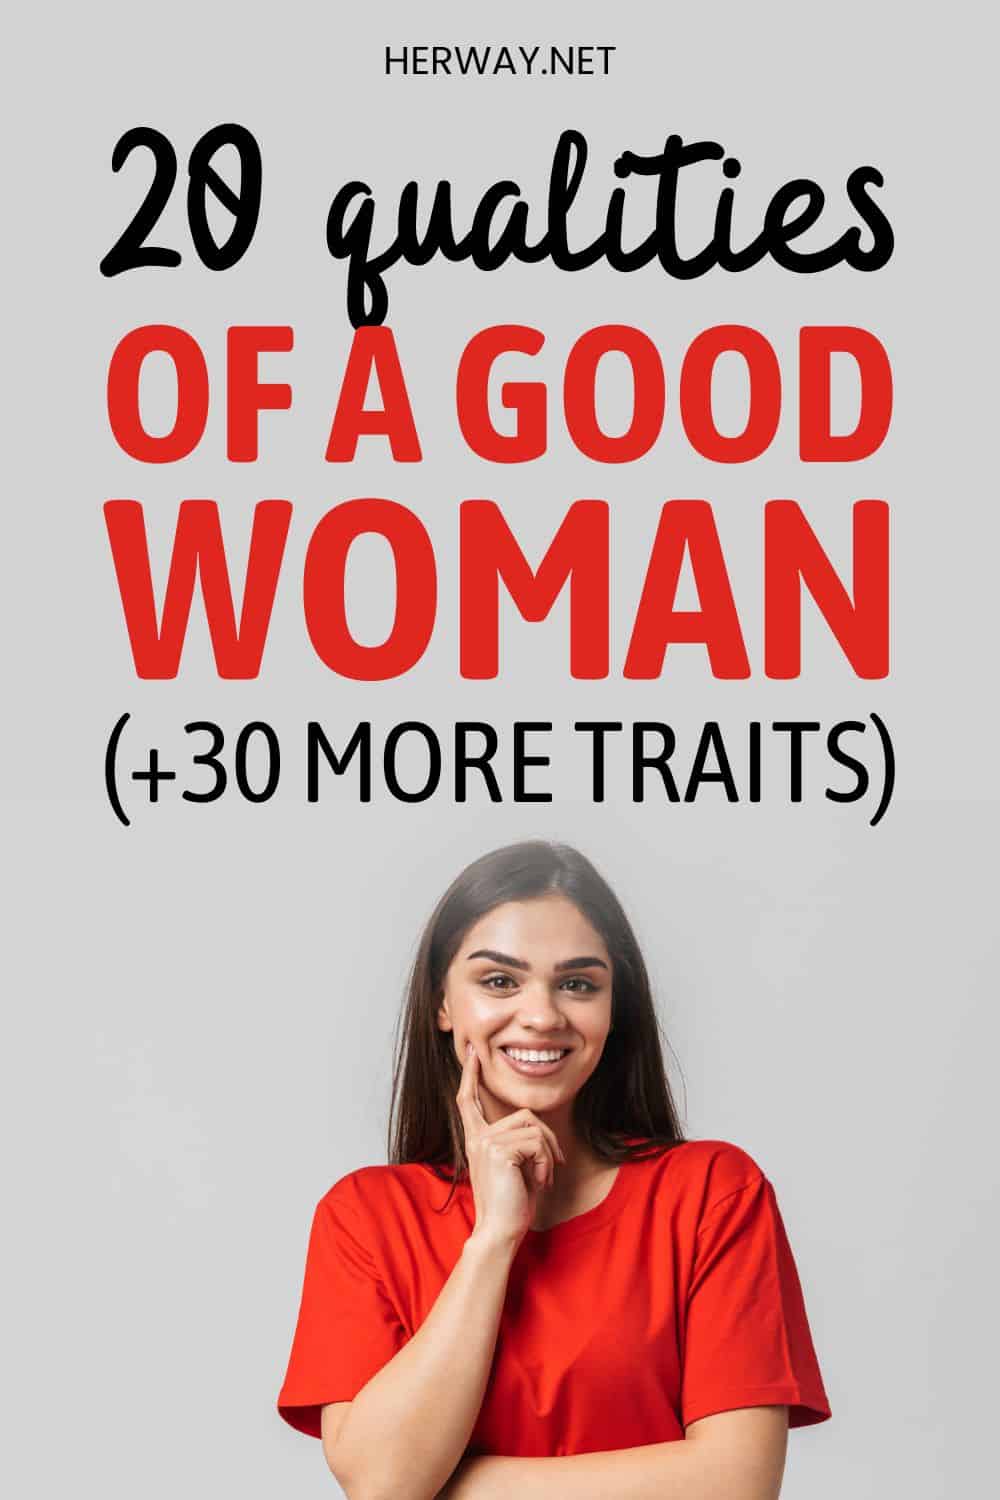 20 Qualities Of A Good Woman (+30 More Traits) Pinterest